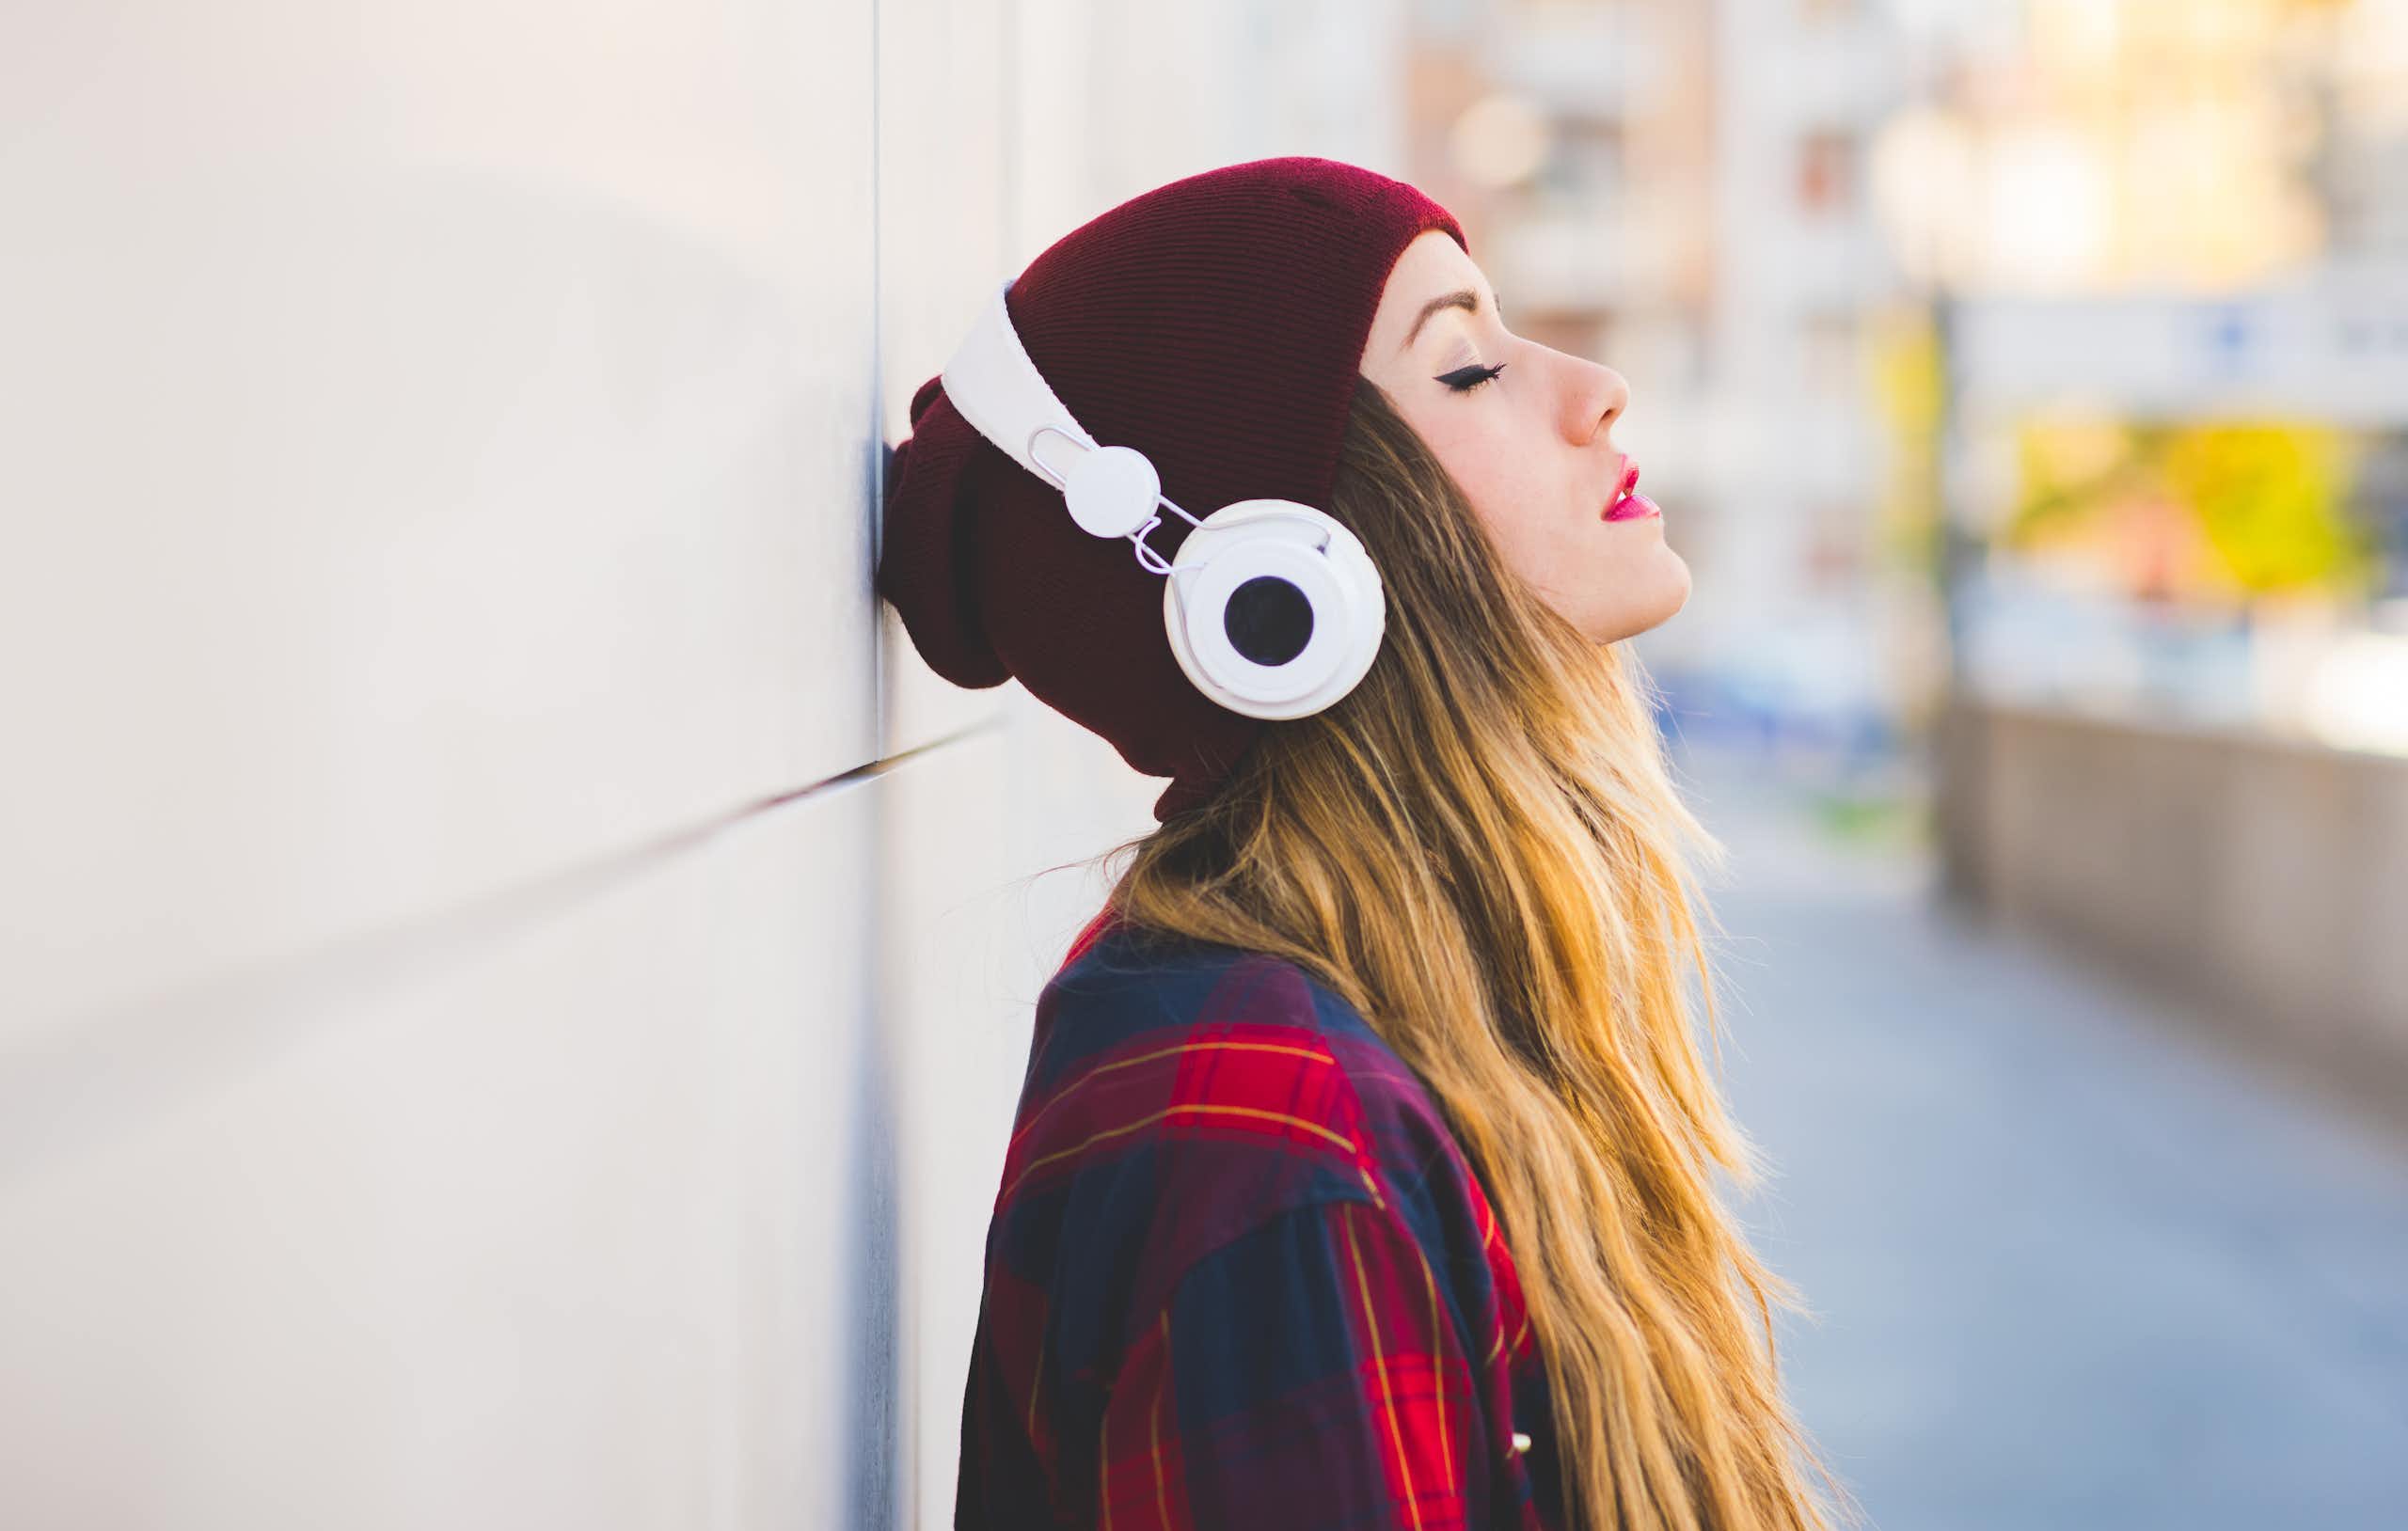 A young woman in a red beanie stands listening to music on headphones.